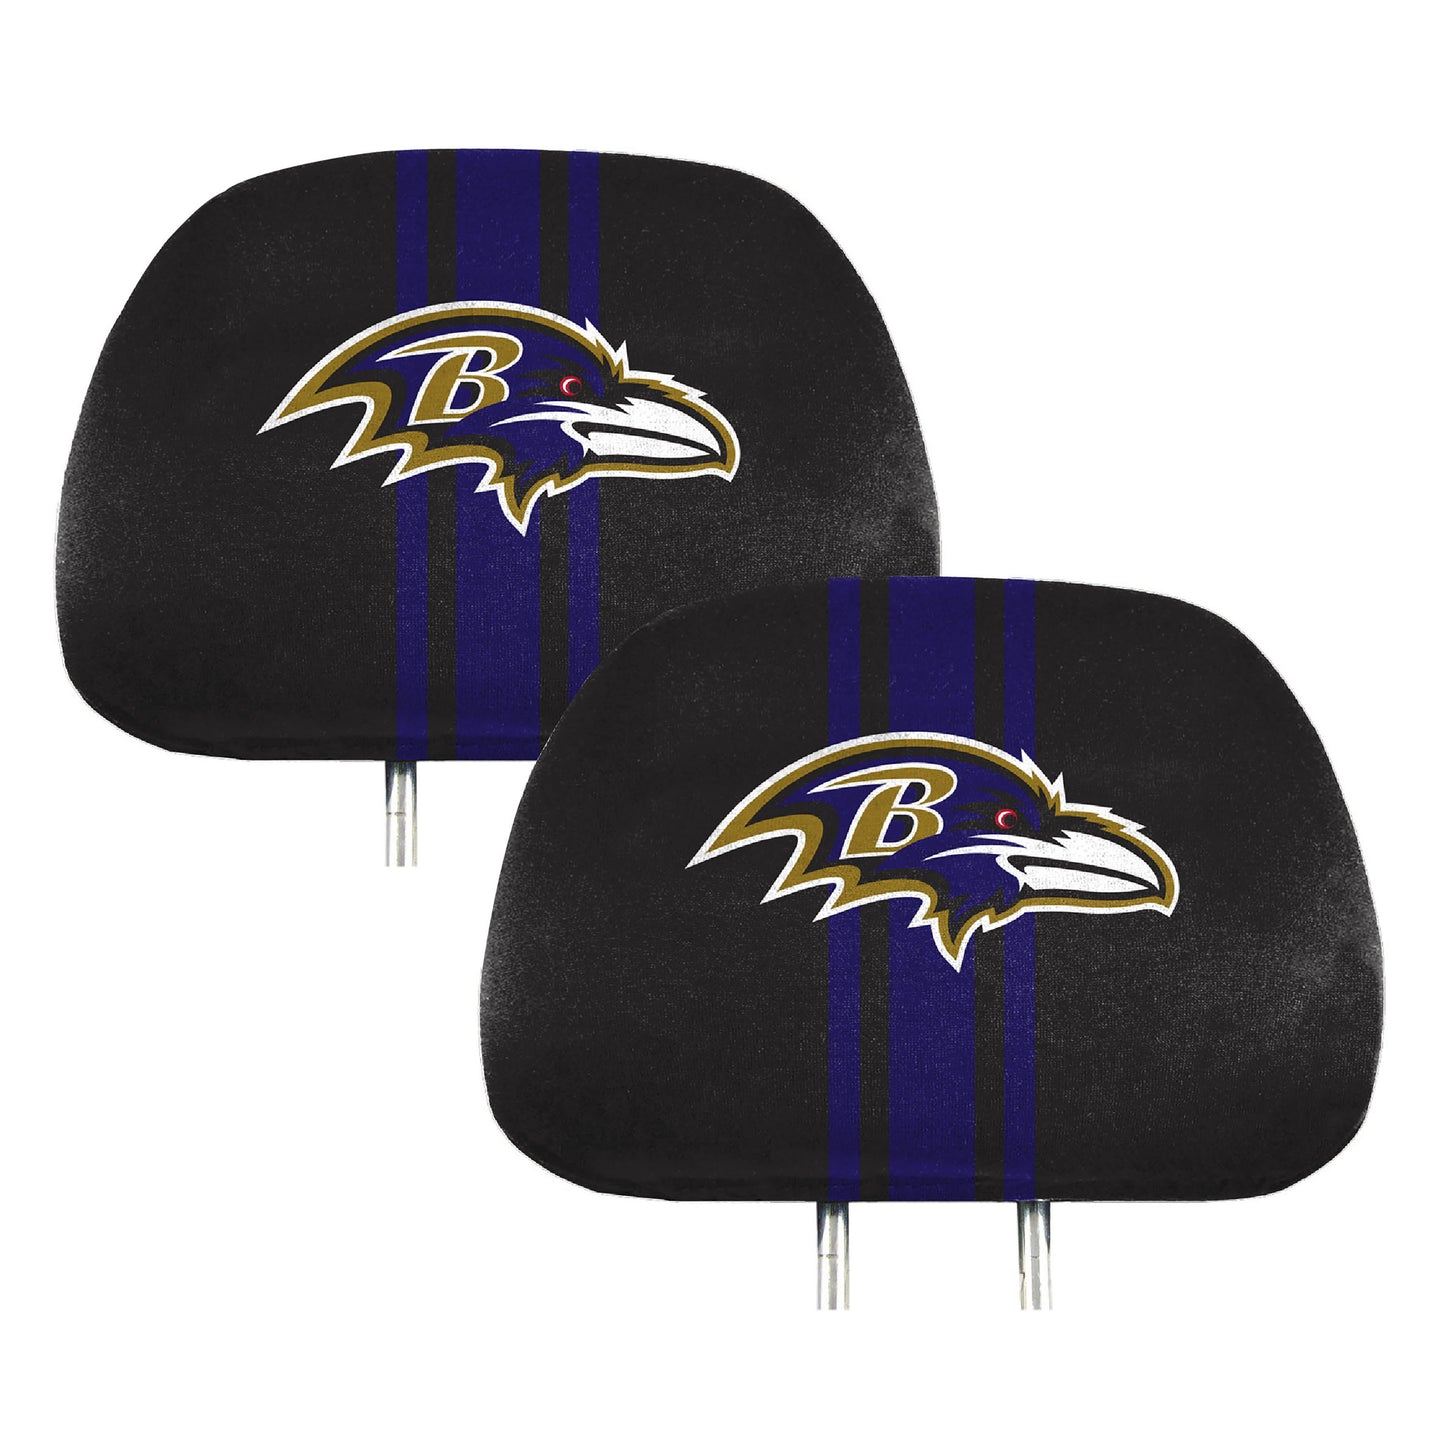 Baltimore Ravens Printed Head Rest Cover Set - 2 Pieces